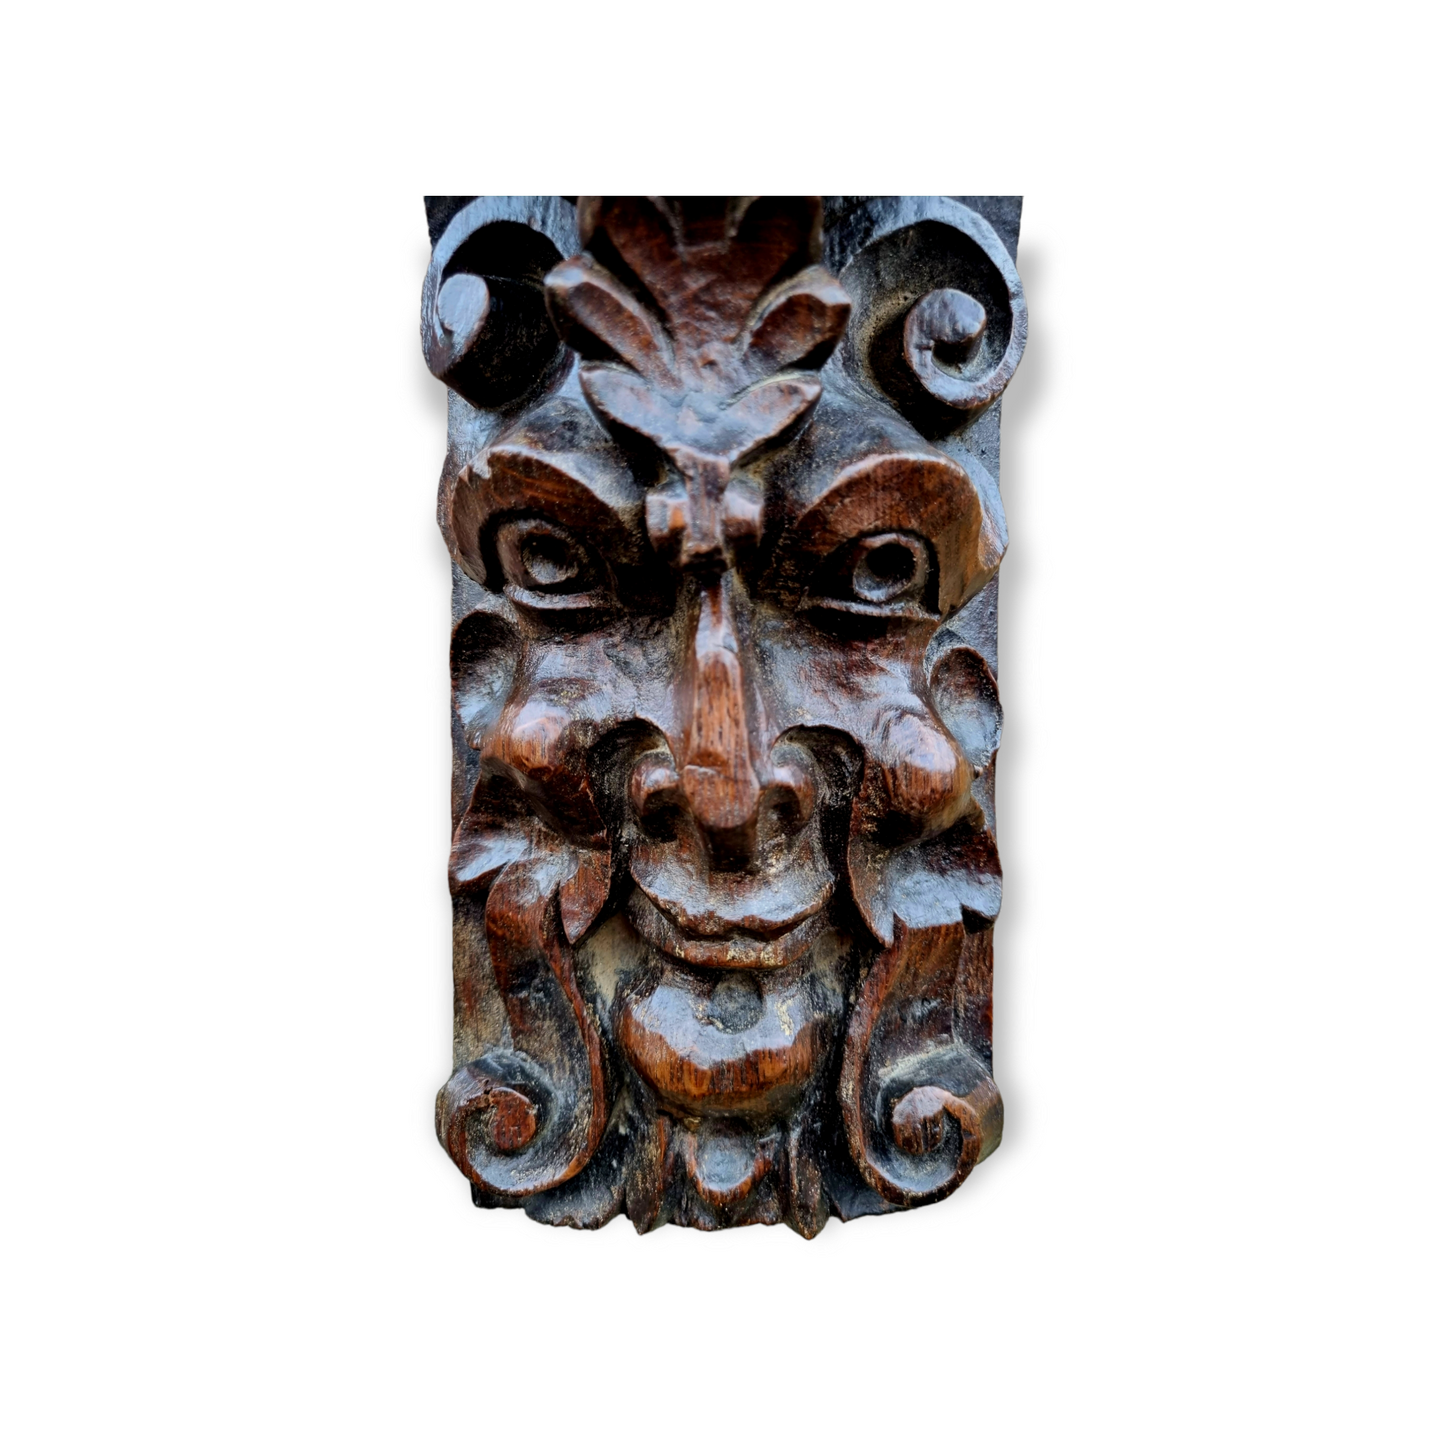 Early 17th Century English Antique Carved Oak Panel / Corbel Depicting a Green Man